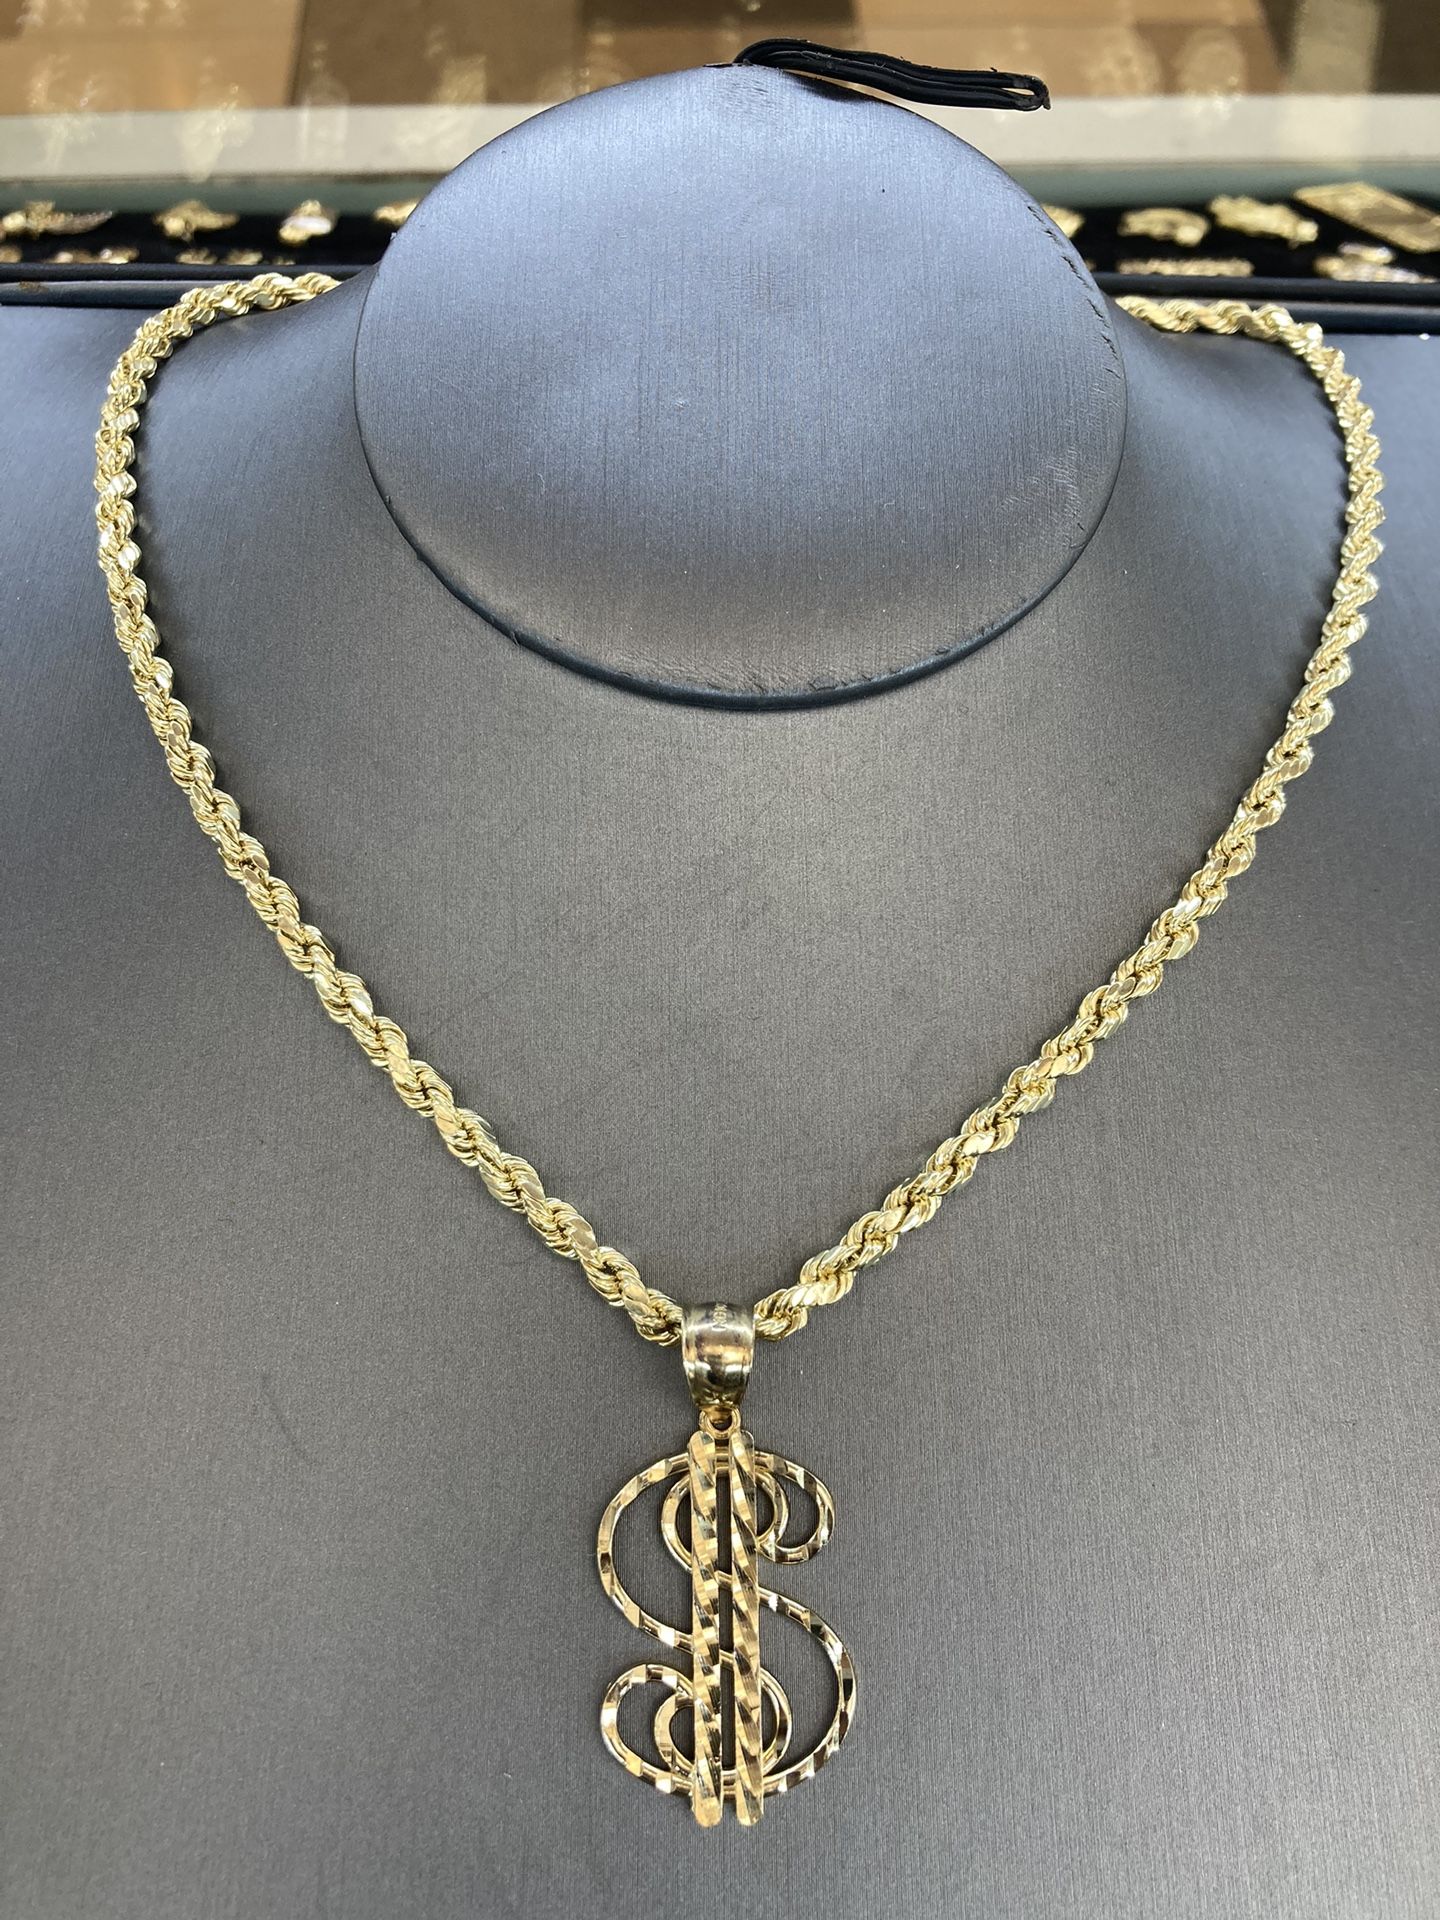 10kt Real Gold Chain (18 Inch,04mm)10kt Real Gold Pendant 